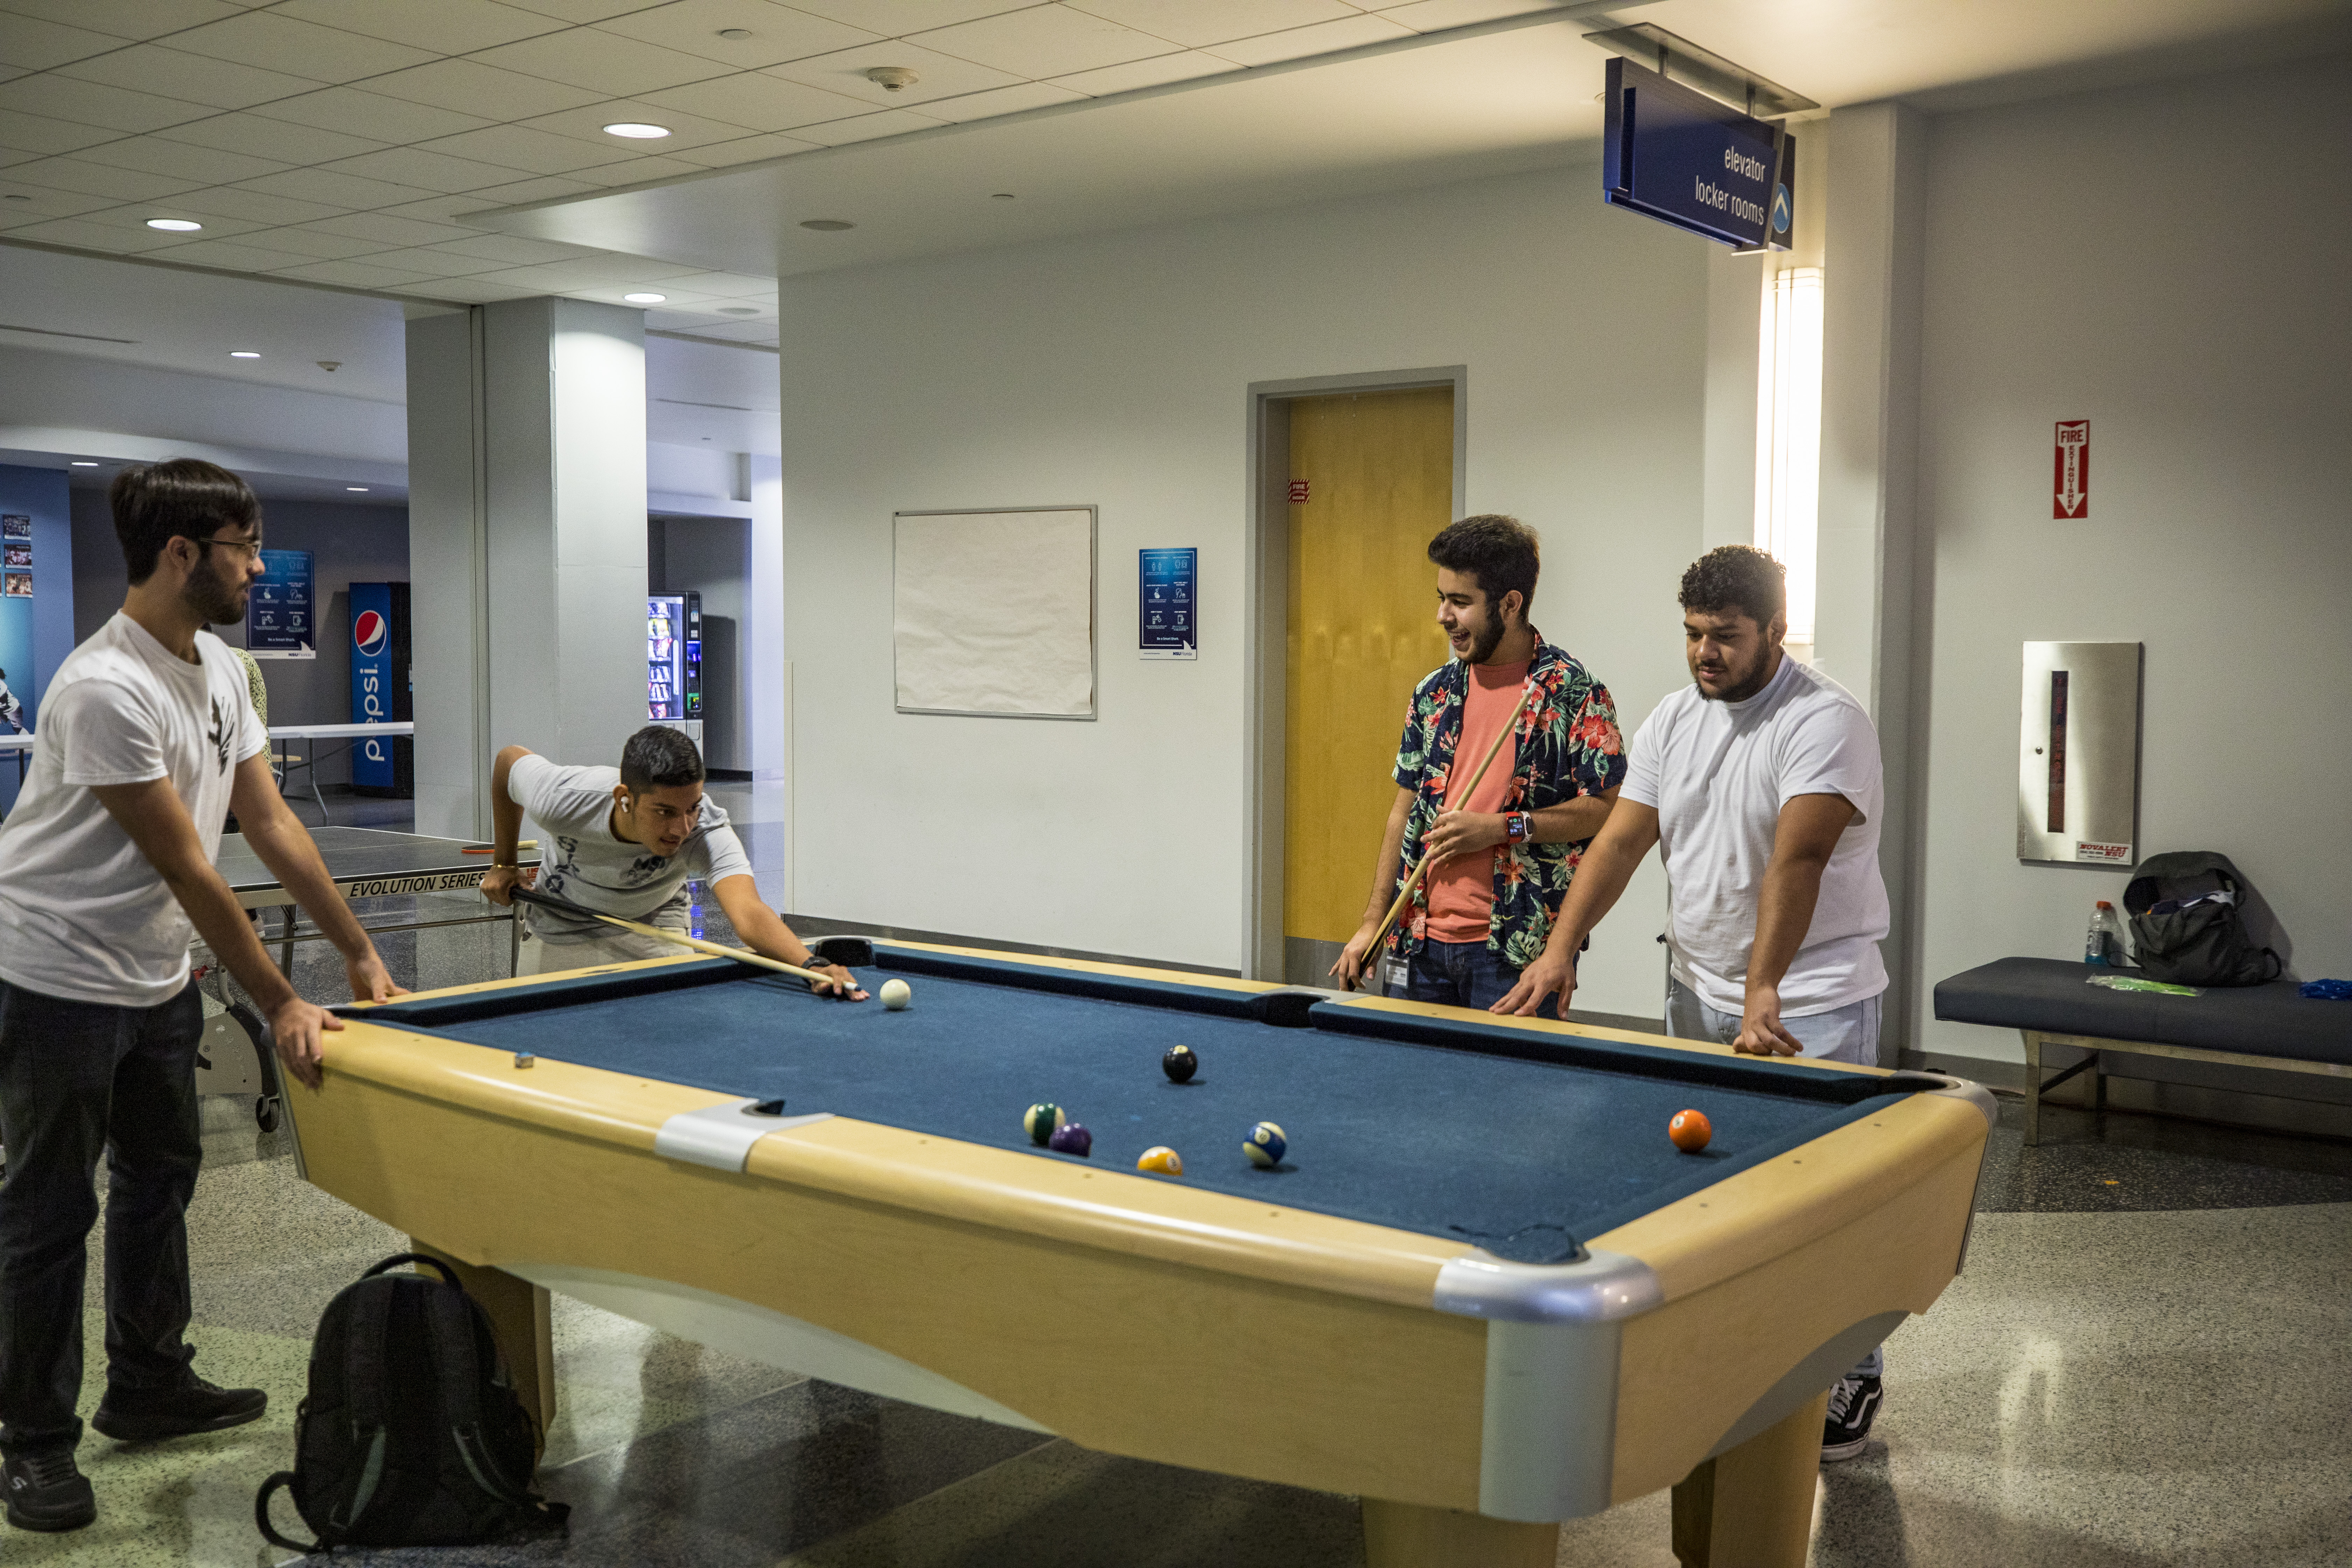 Four students gather around a pool table while one takes aim. Stripes are minimally in the lead with an advantage of one.